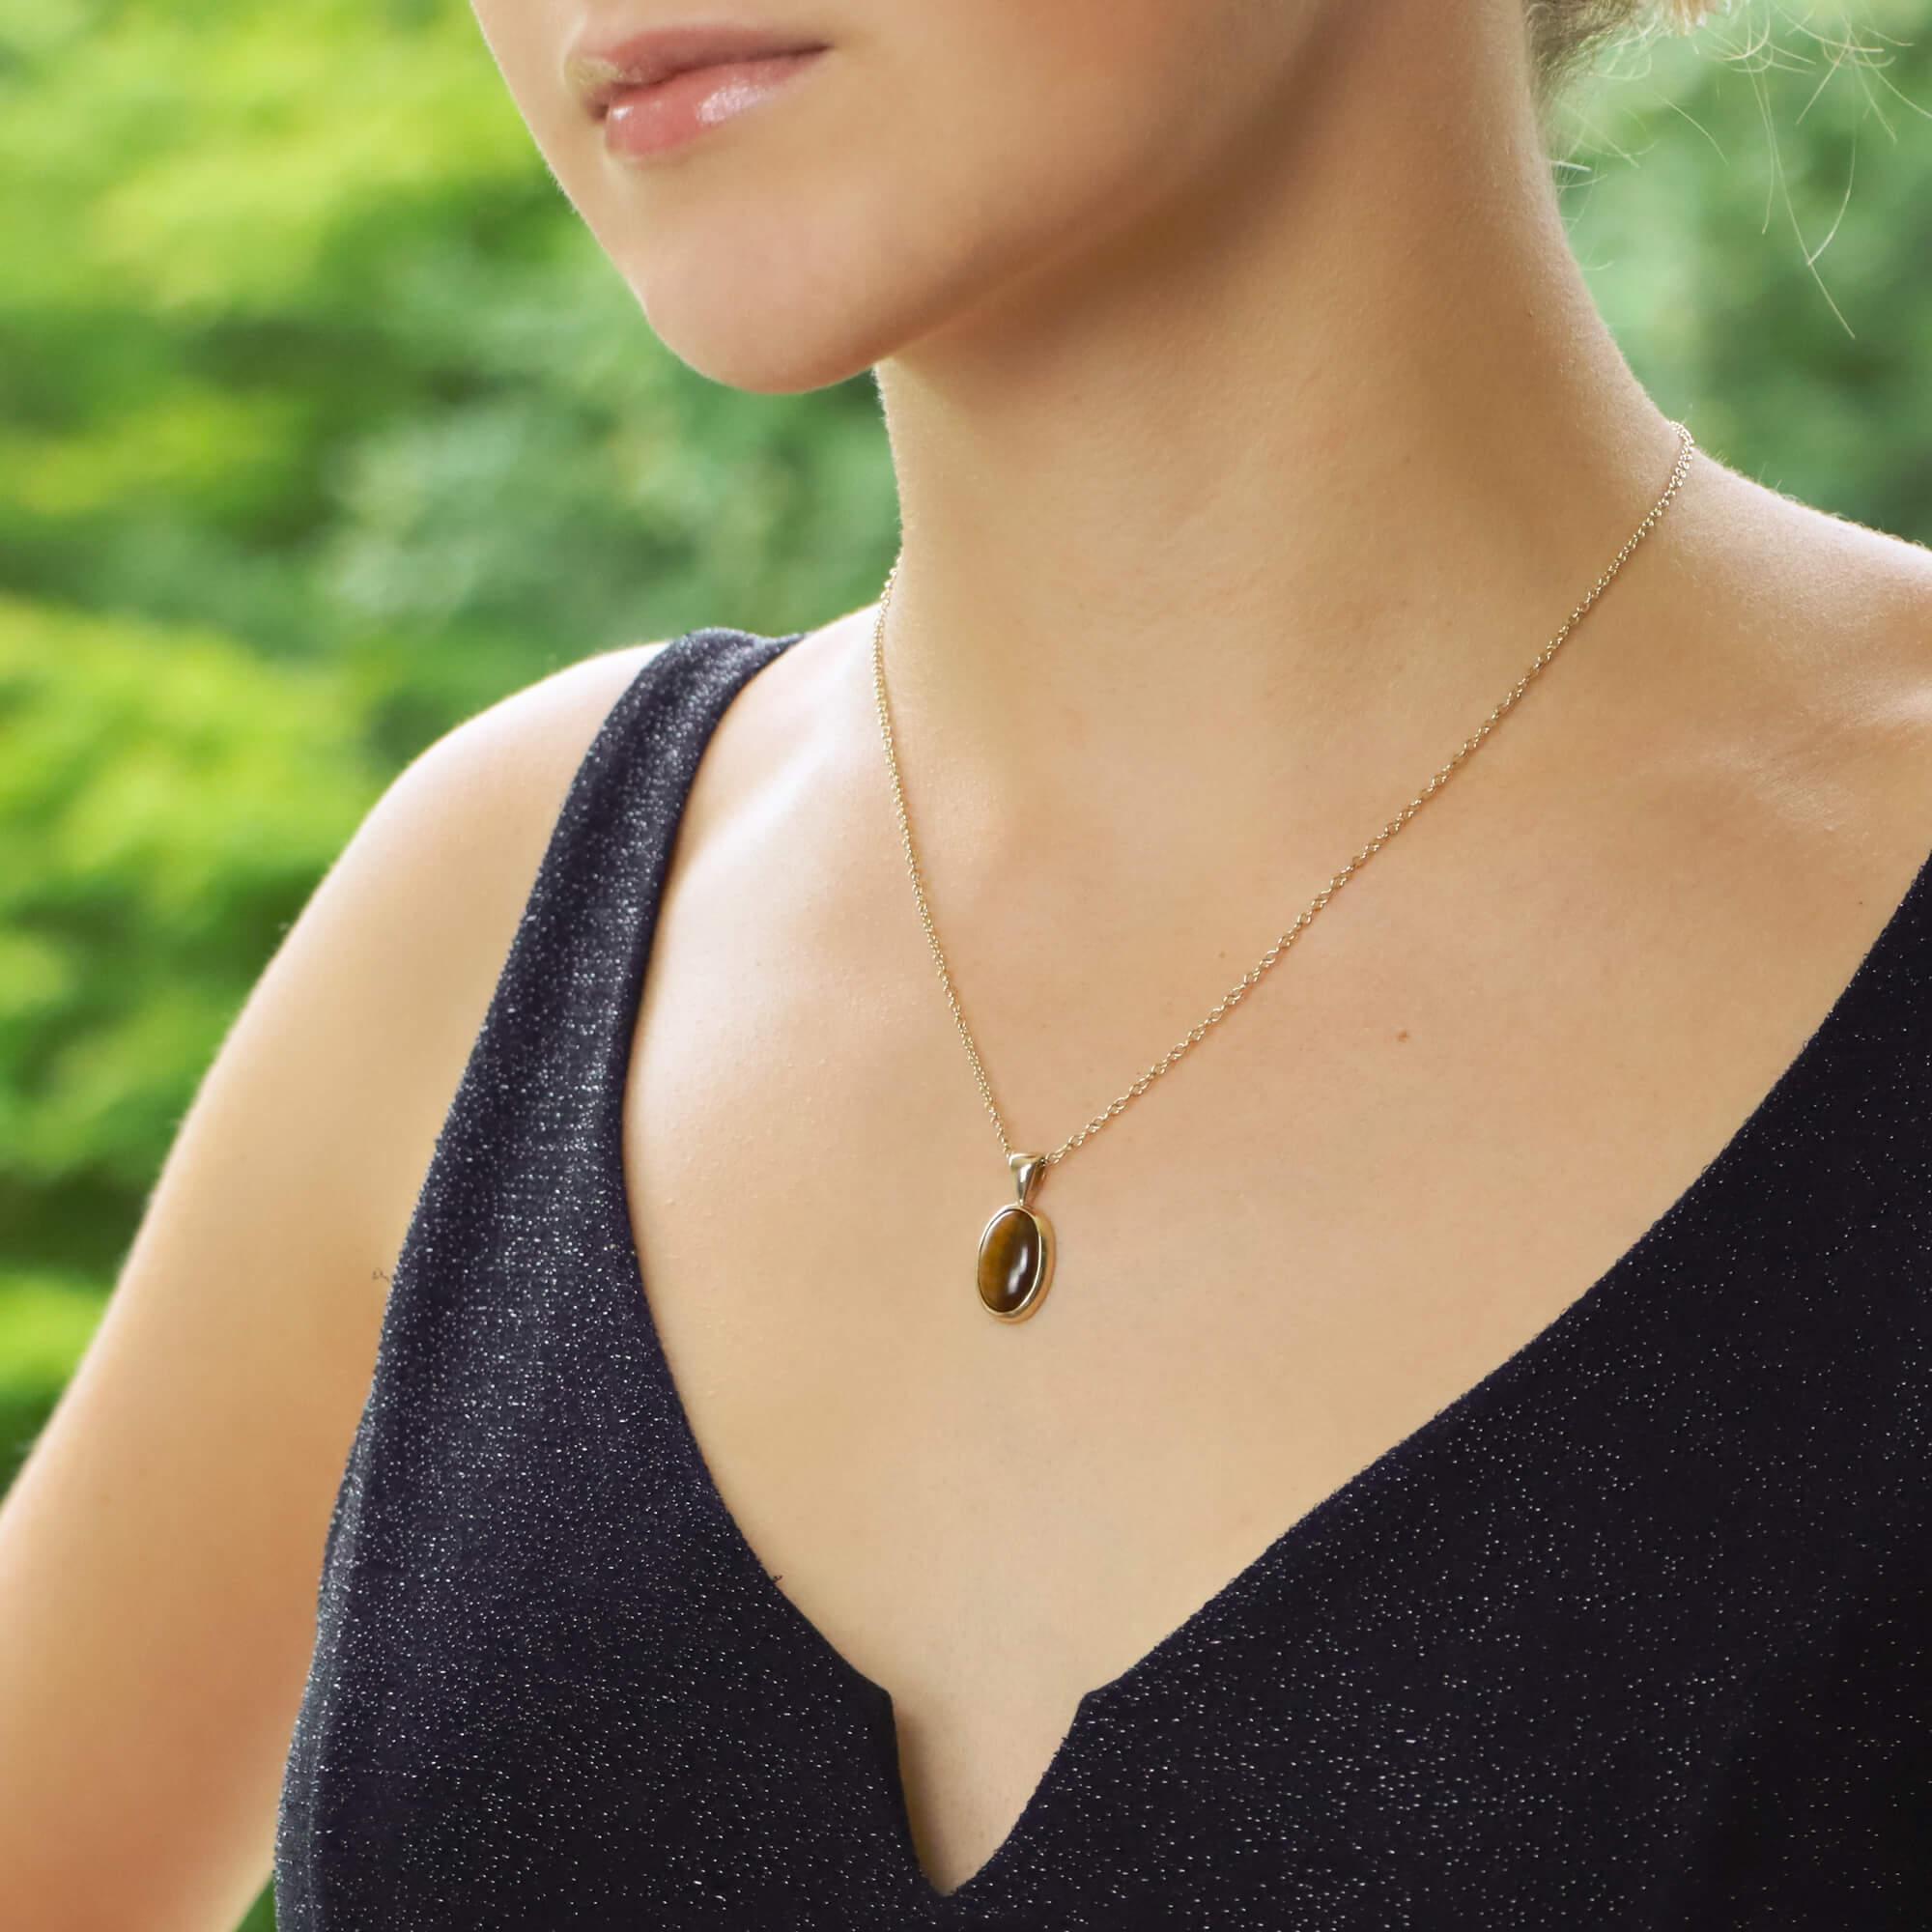 A beautiful cabochon tiger’s eye pendant set in 9k yellow gold.

The pendant solely features a mesmerizing cabochon tiger’s eye which vis simply bezel set securely in 9k yellow gold. The pendant hangs from a matching 9k yellow gold trace chain. The